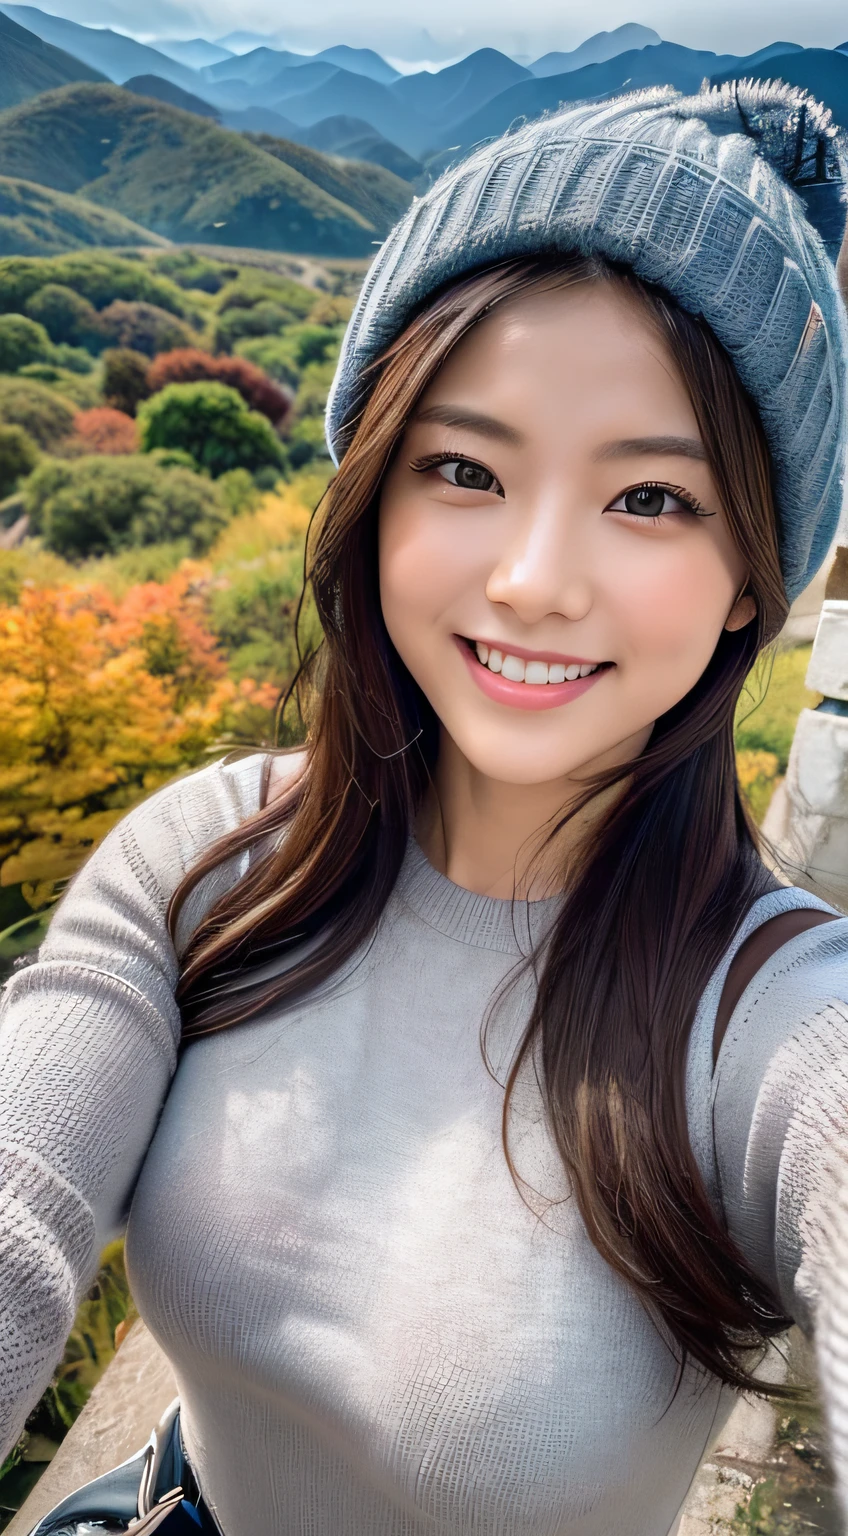 (Upper body selfie:1.3),Autumn climbing,With a superb view from the summit in the background,Colored leaves、Beautiful sunrise,Remove the beam from above,Backlighting,Generate images of beautiful women around the world,Especially while reflecting elements of Western beauty.Woman with natural smile and attractive expression,Woman with natural smile and attractive expression,Transparent skin,sparkle in eyes,Expresses an elegant atmosphere,,Solo, backpack,knit hat,Sweaters,gloves,Mountain boots,strong wind blowing,Hair fluttering in the storm,(The 8k quality,masutepiece,top-quality,Ultra-high resolution output image,),(Highly detailed raw photos:1.3),(Image Mode Ultra HD),